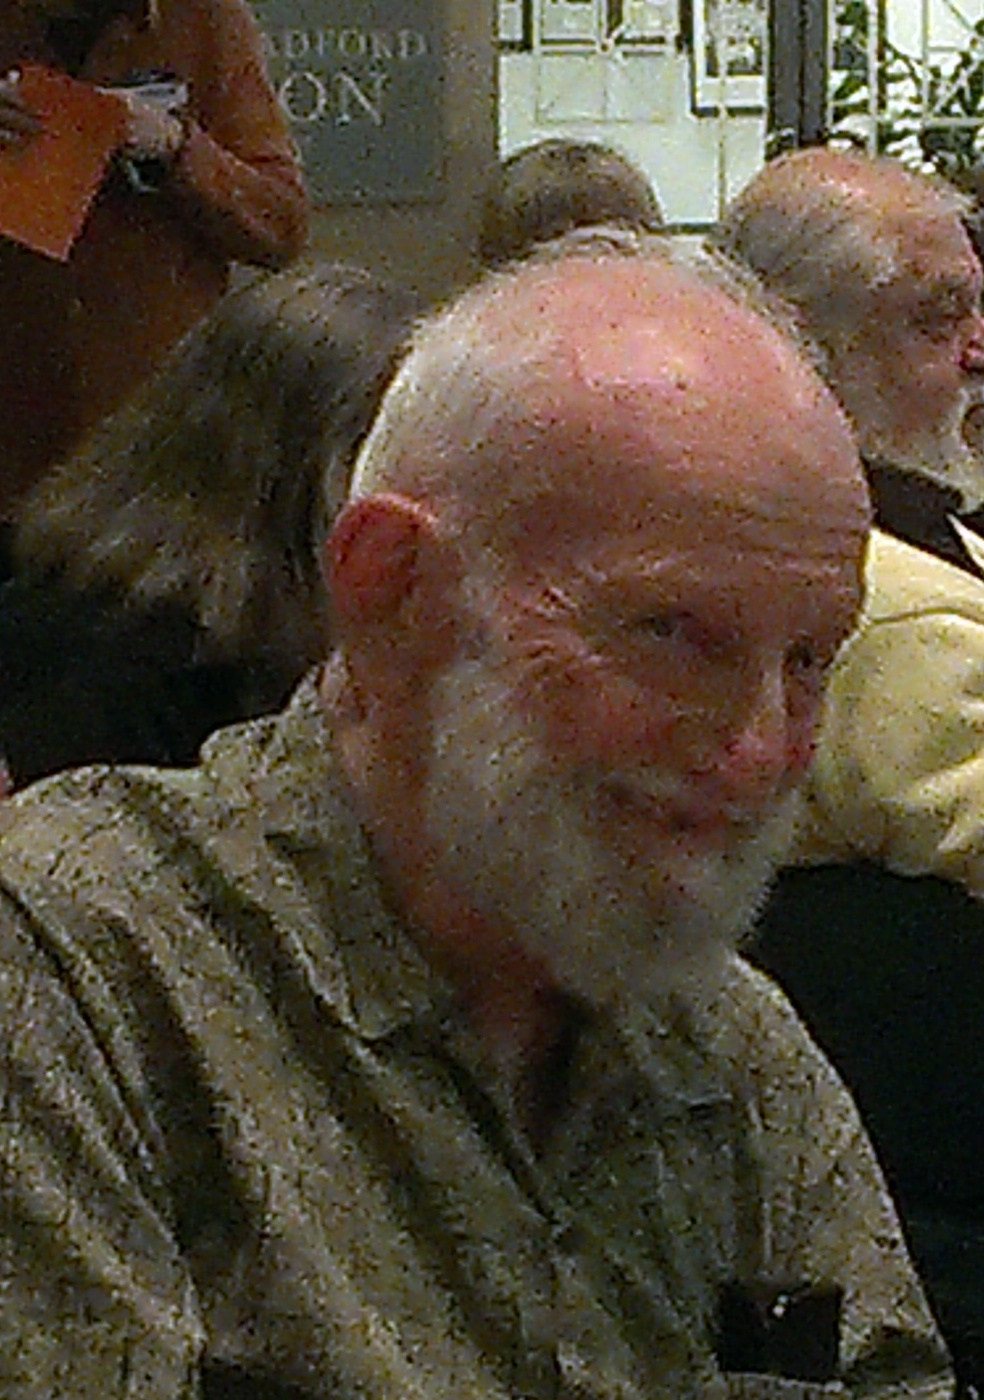 Richard Levins - Richard 'Dick' Levins, PhD, during applause at his 5-23-2015 85th Birthday Symposium Tribute Dinner